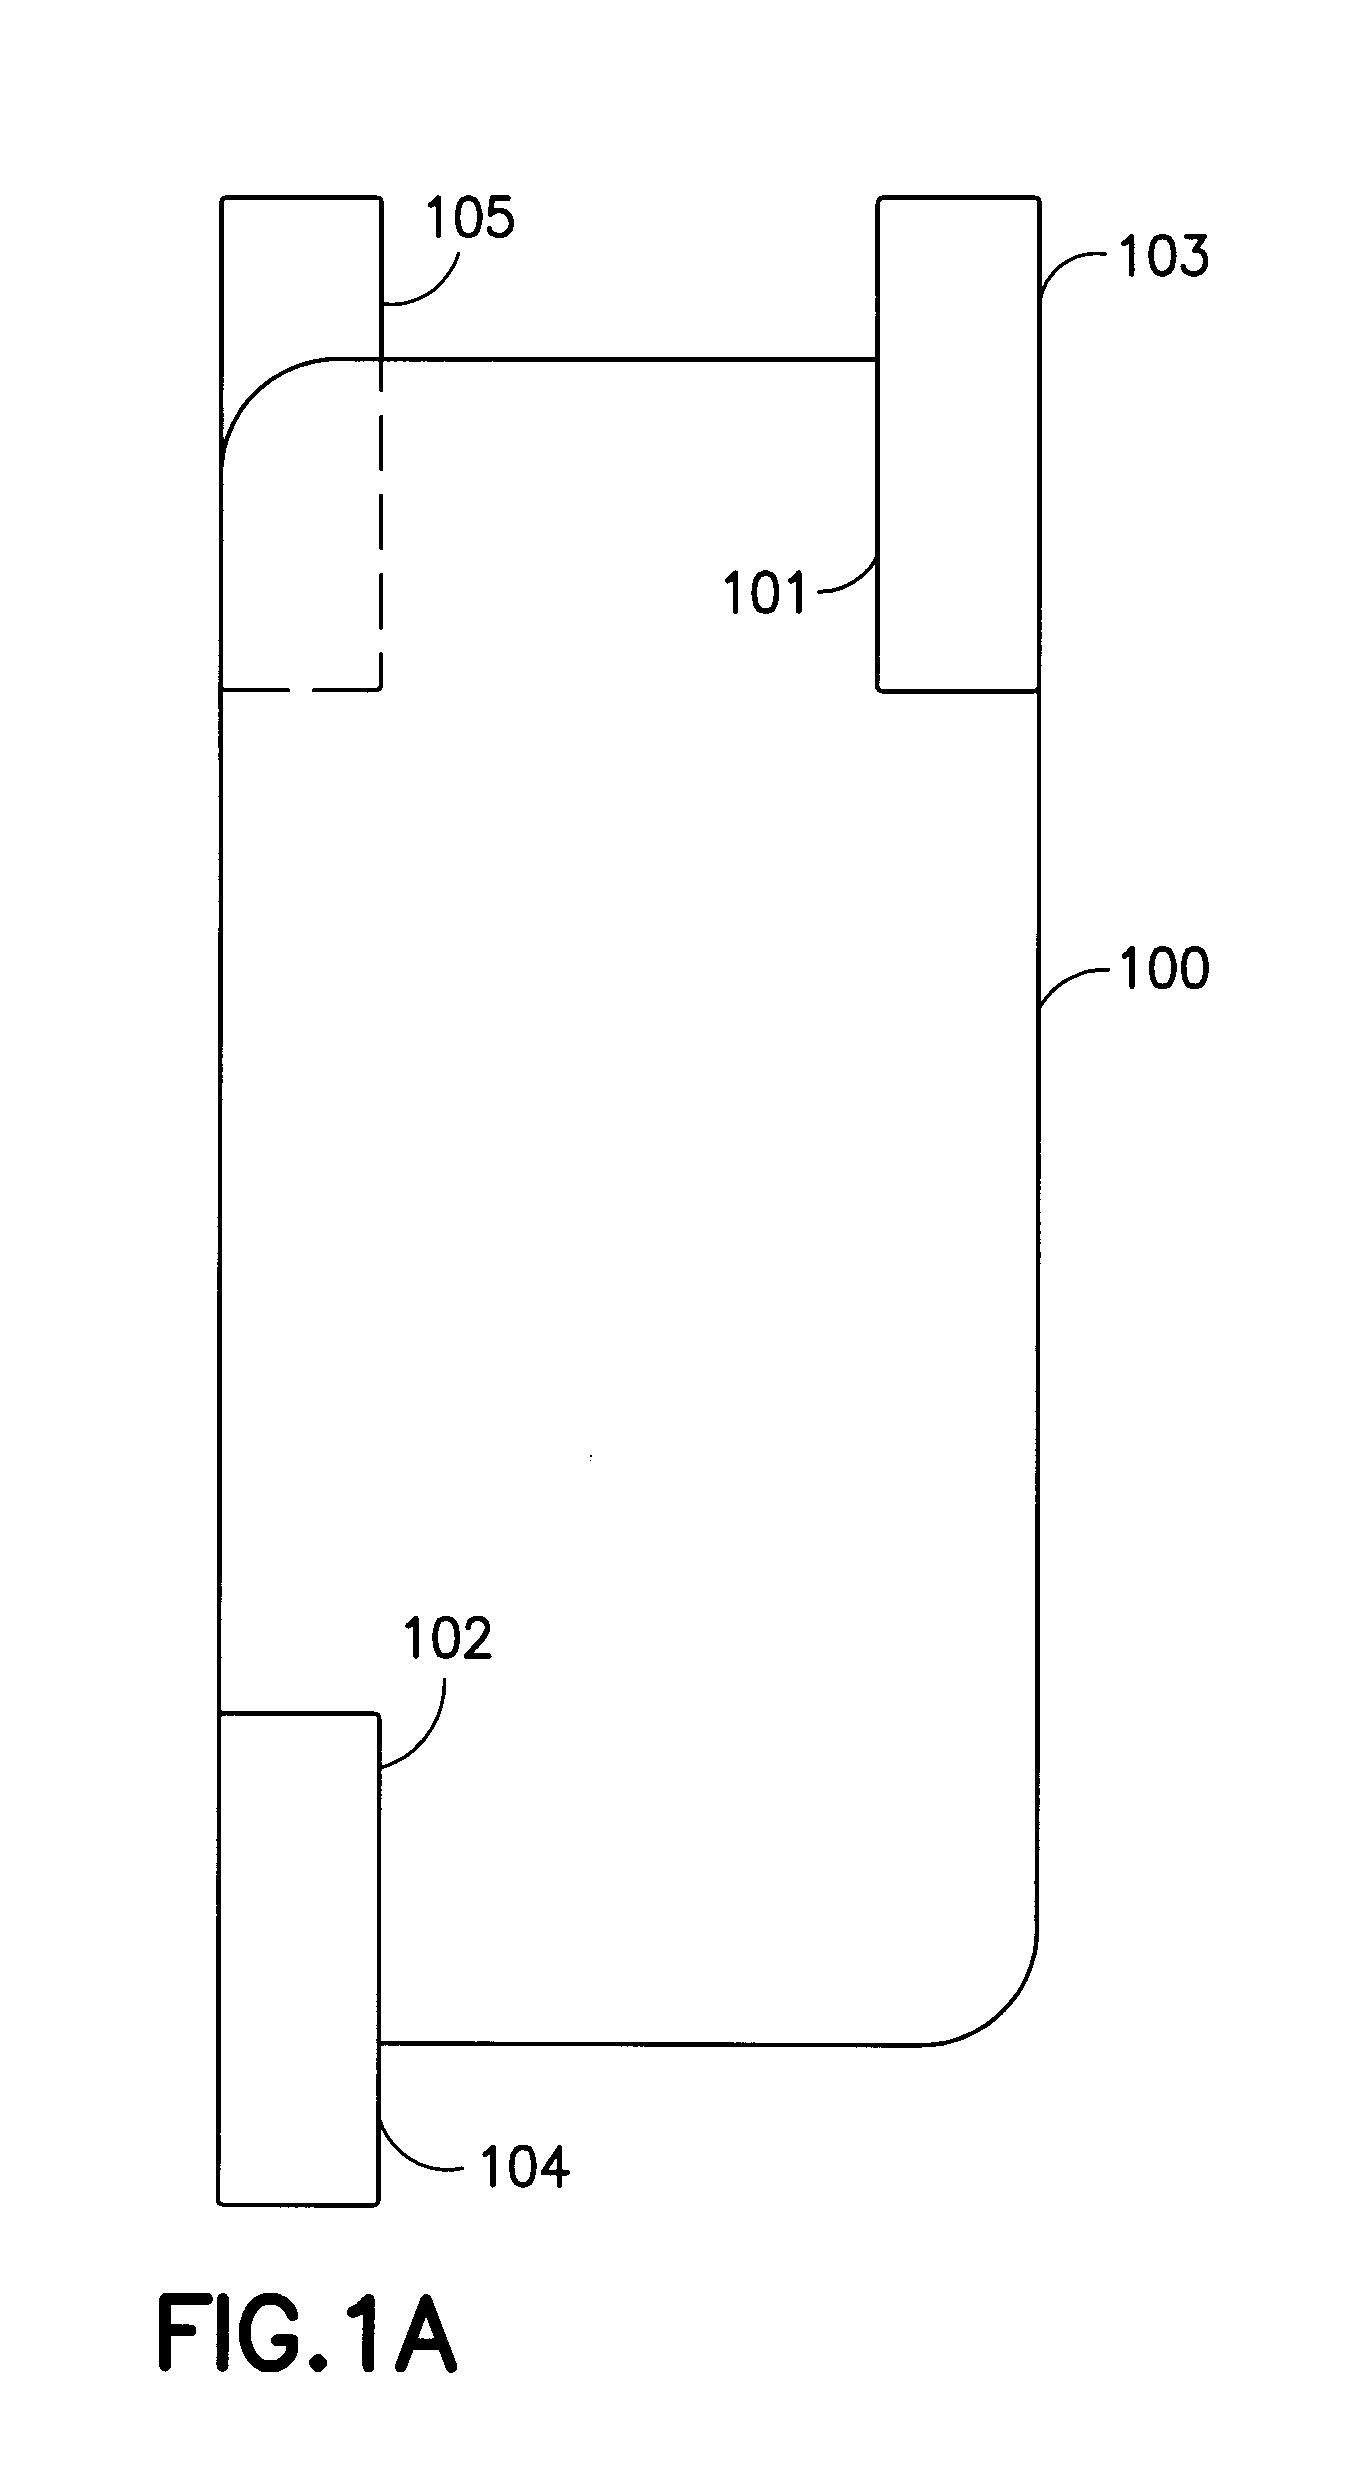 Methods and systems for installing screen protectors for electronic devices